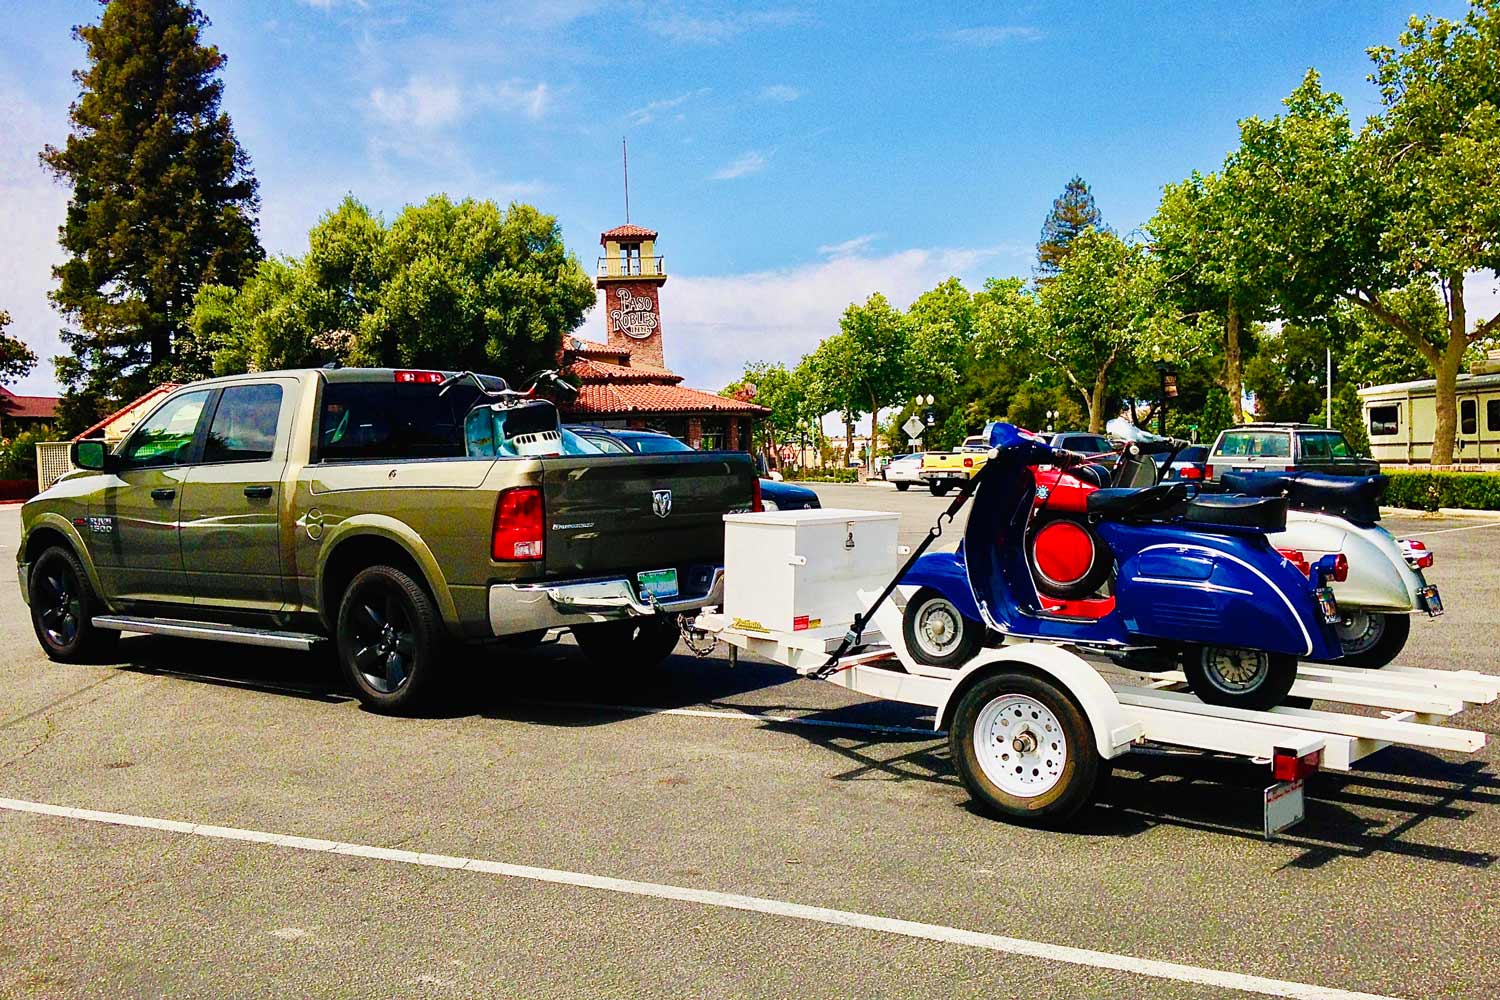 A green Ram truck tows a white motorcycle trailer with three vintage scooters riding on it.